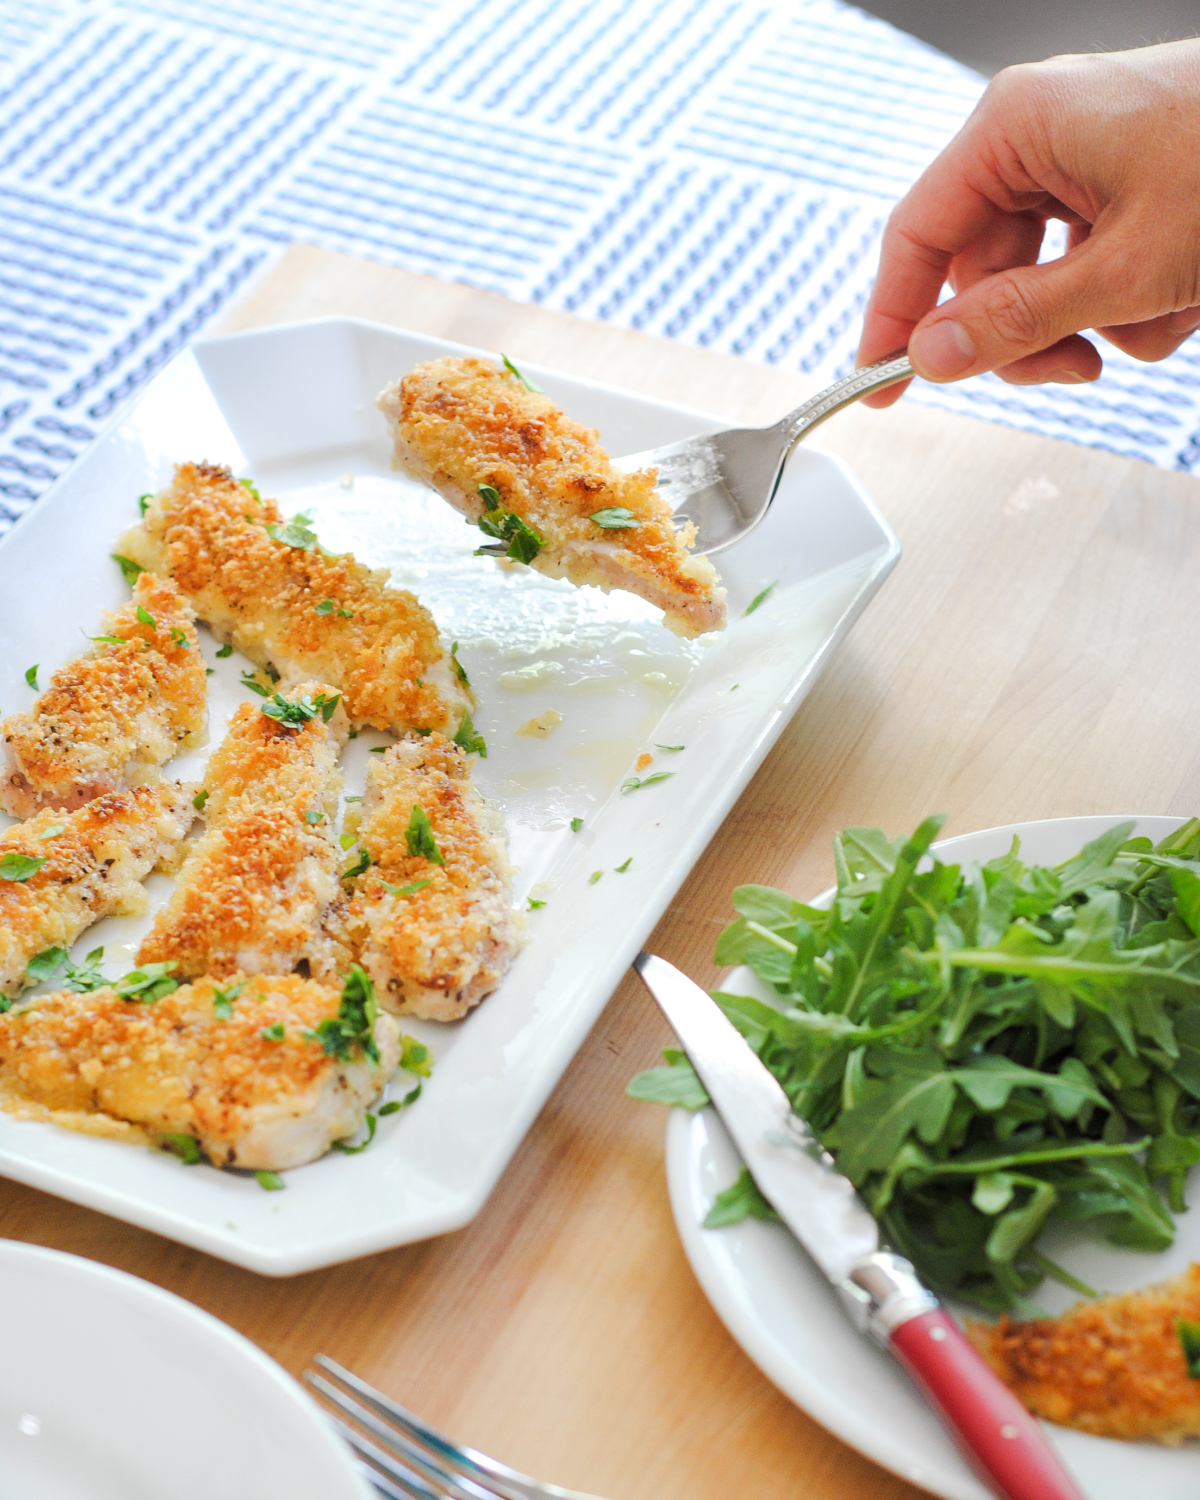 Easy Baked Crispy Chicken Cutlets Recipe - The Chronicles of Home